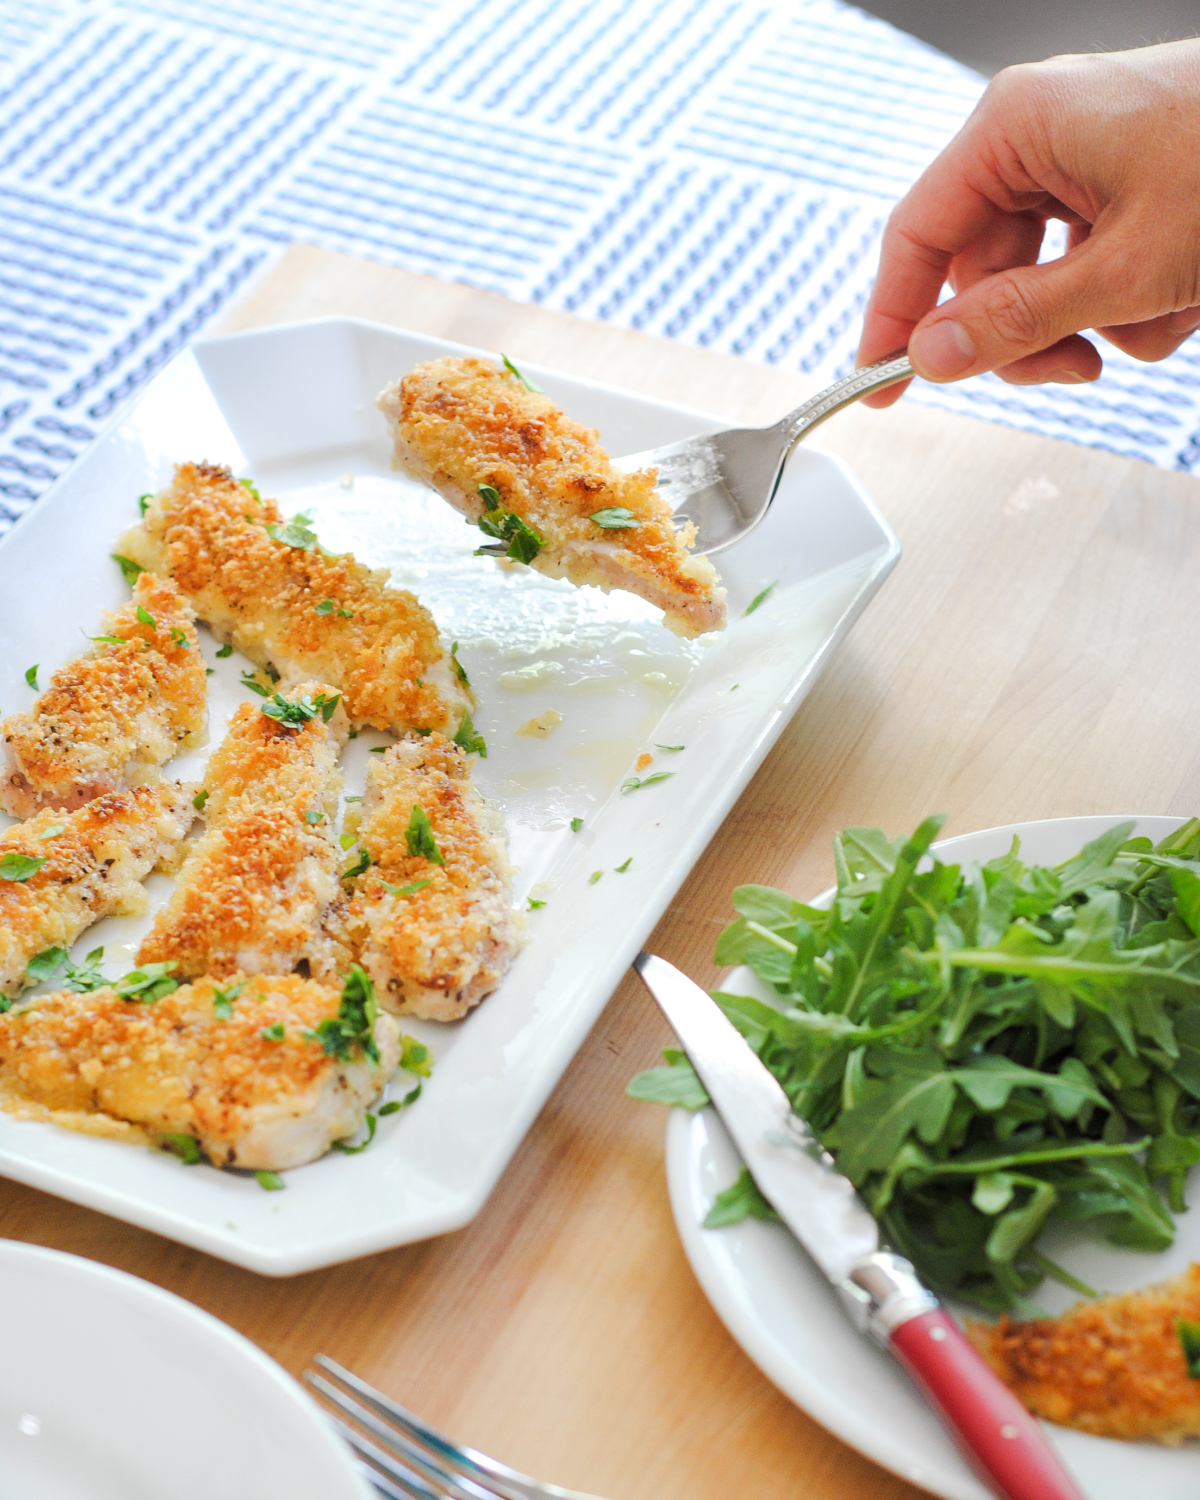 Easy Baked Crispy Chicken Cutlets Recipe - The Chronicles of Home